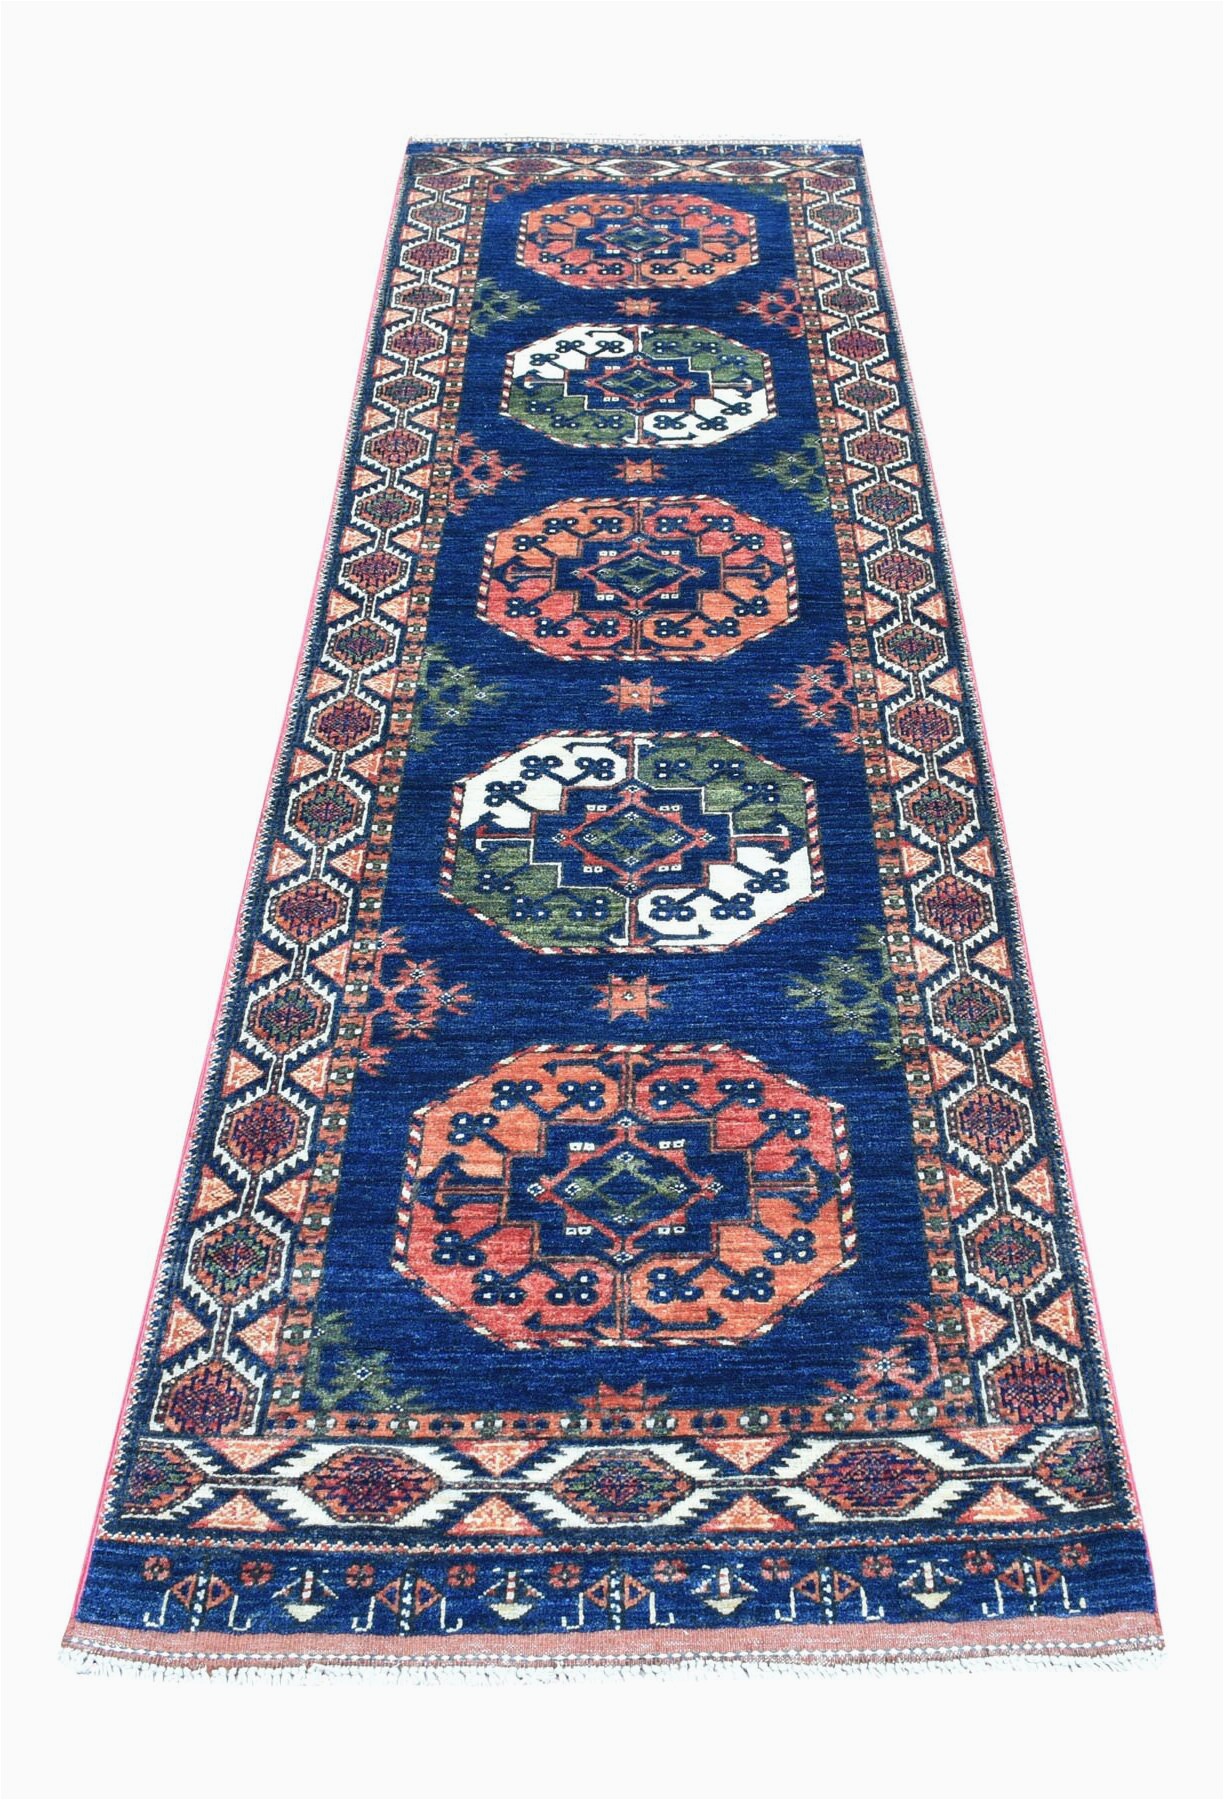 isabelline one of a kind hand knotted orangeblue 28 x 97 runner wool area rug w